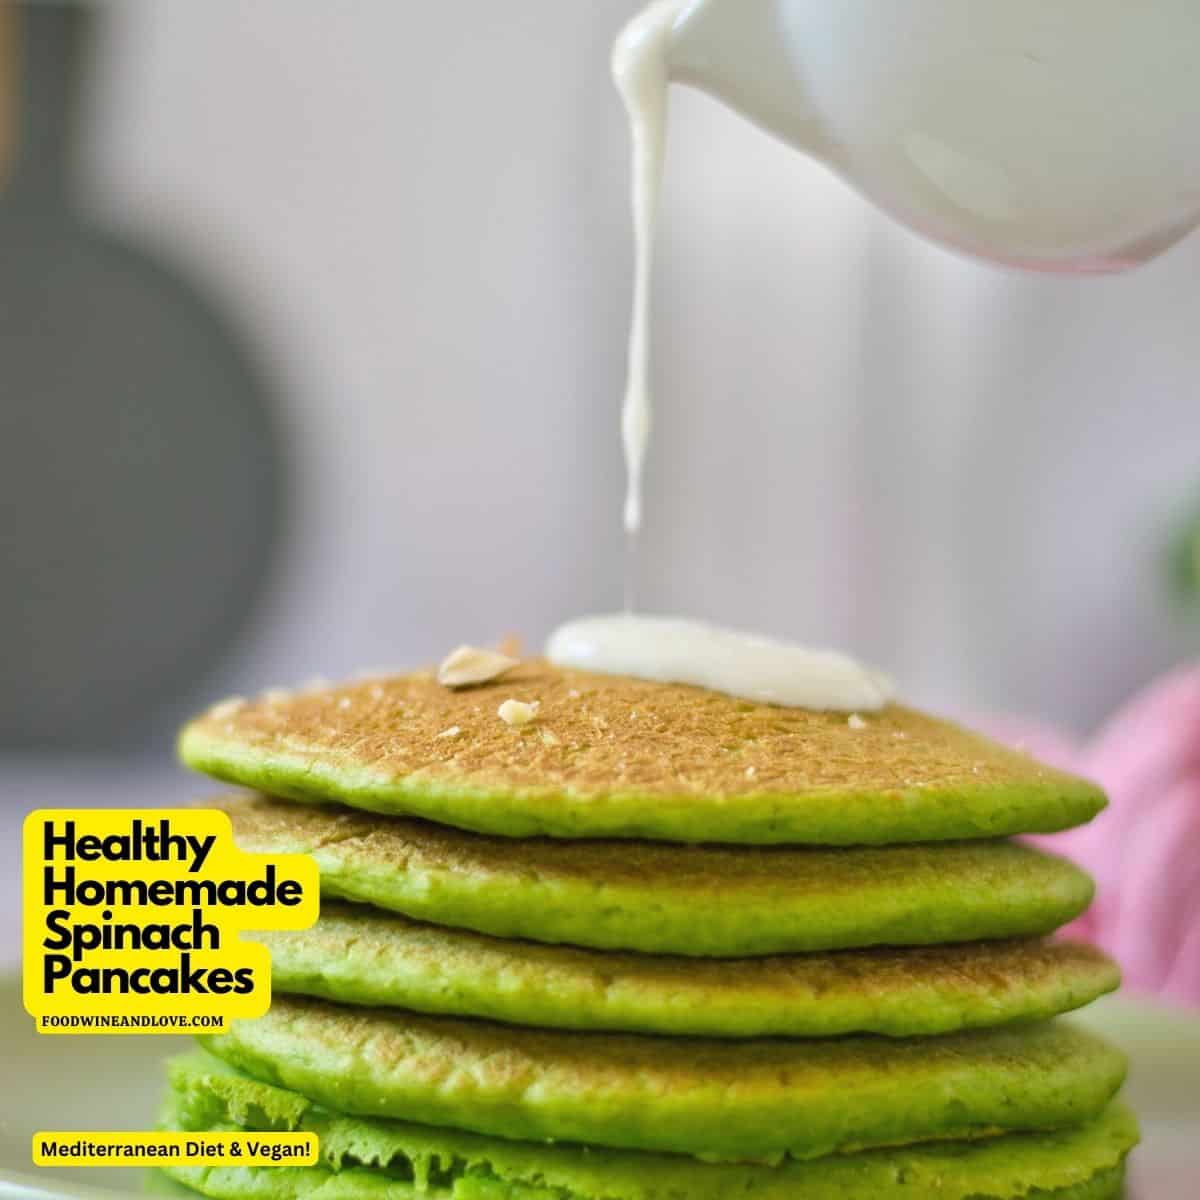 Healthy Homemade Spinach Pancakes, a simple recipe for making a delicious breakfast using spinach. Included vegan options.